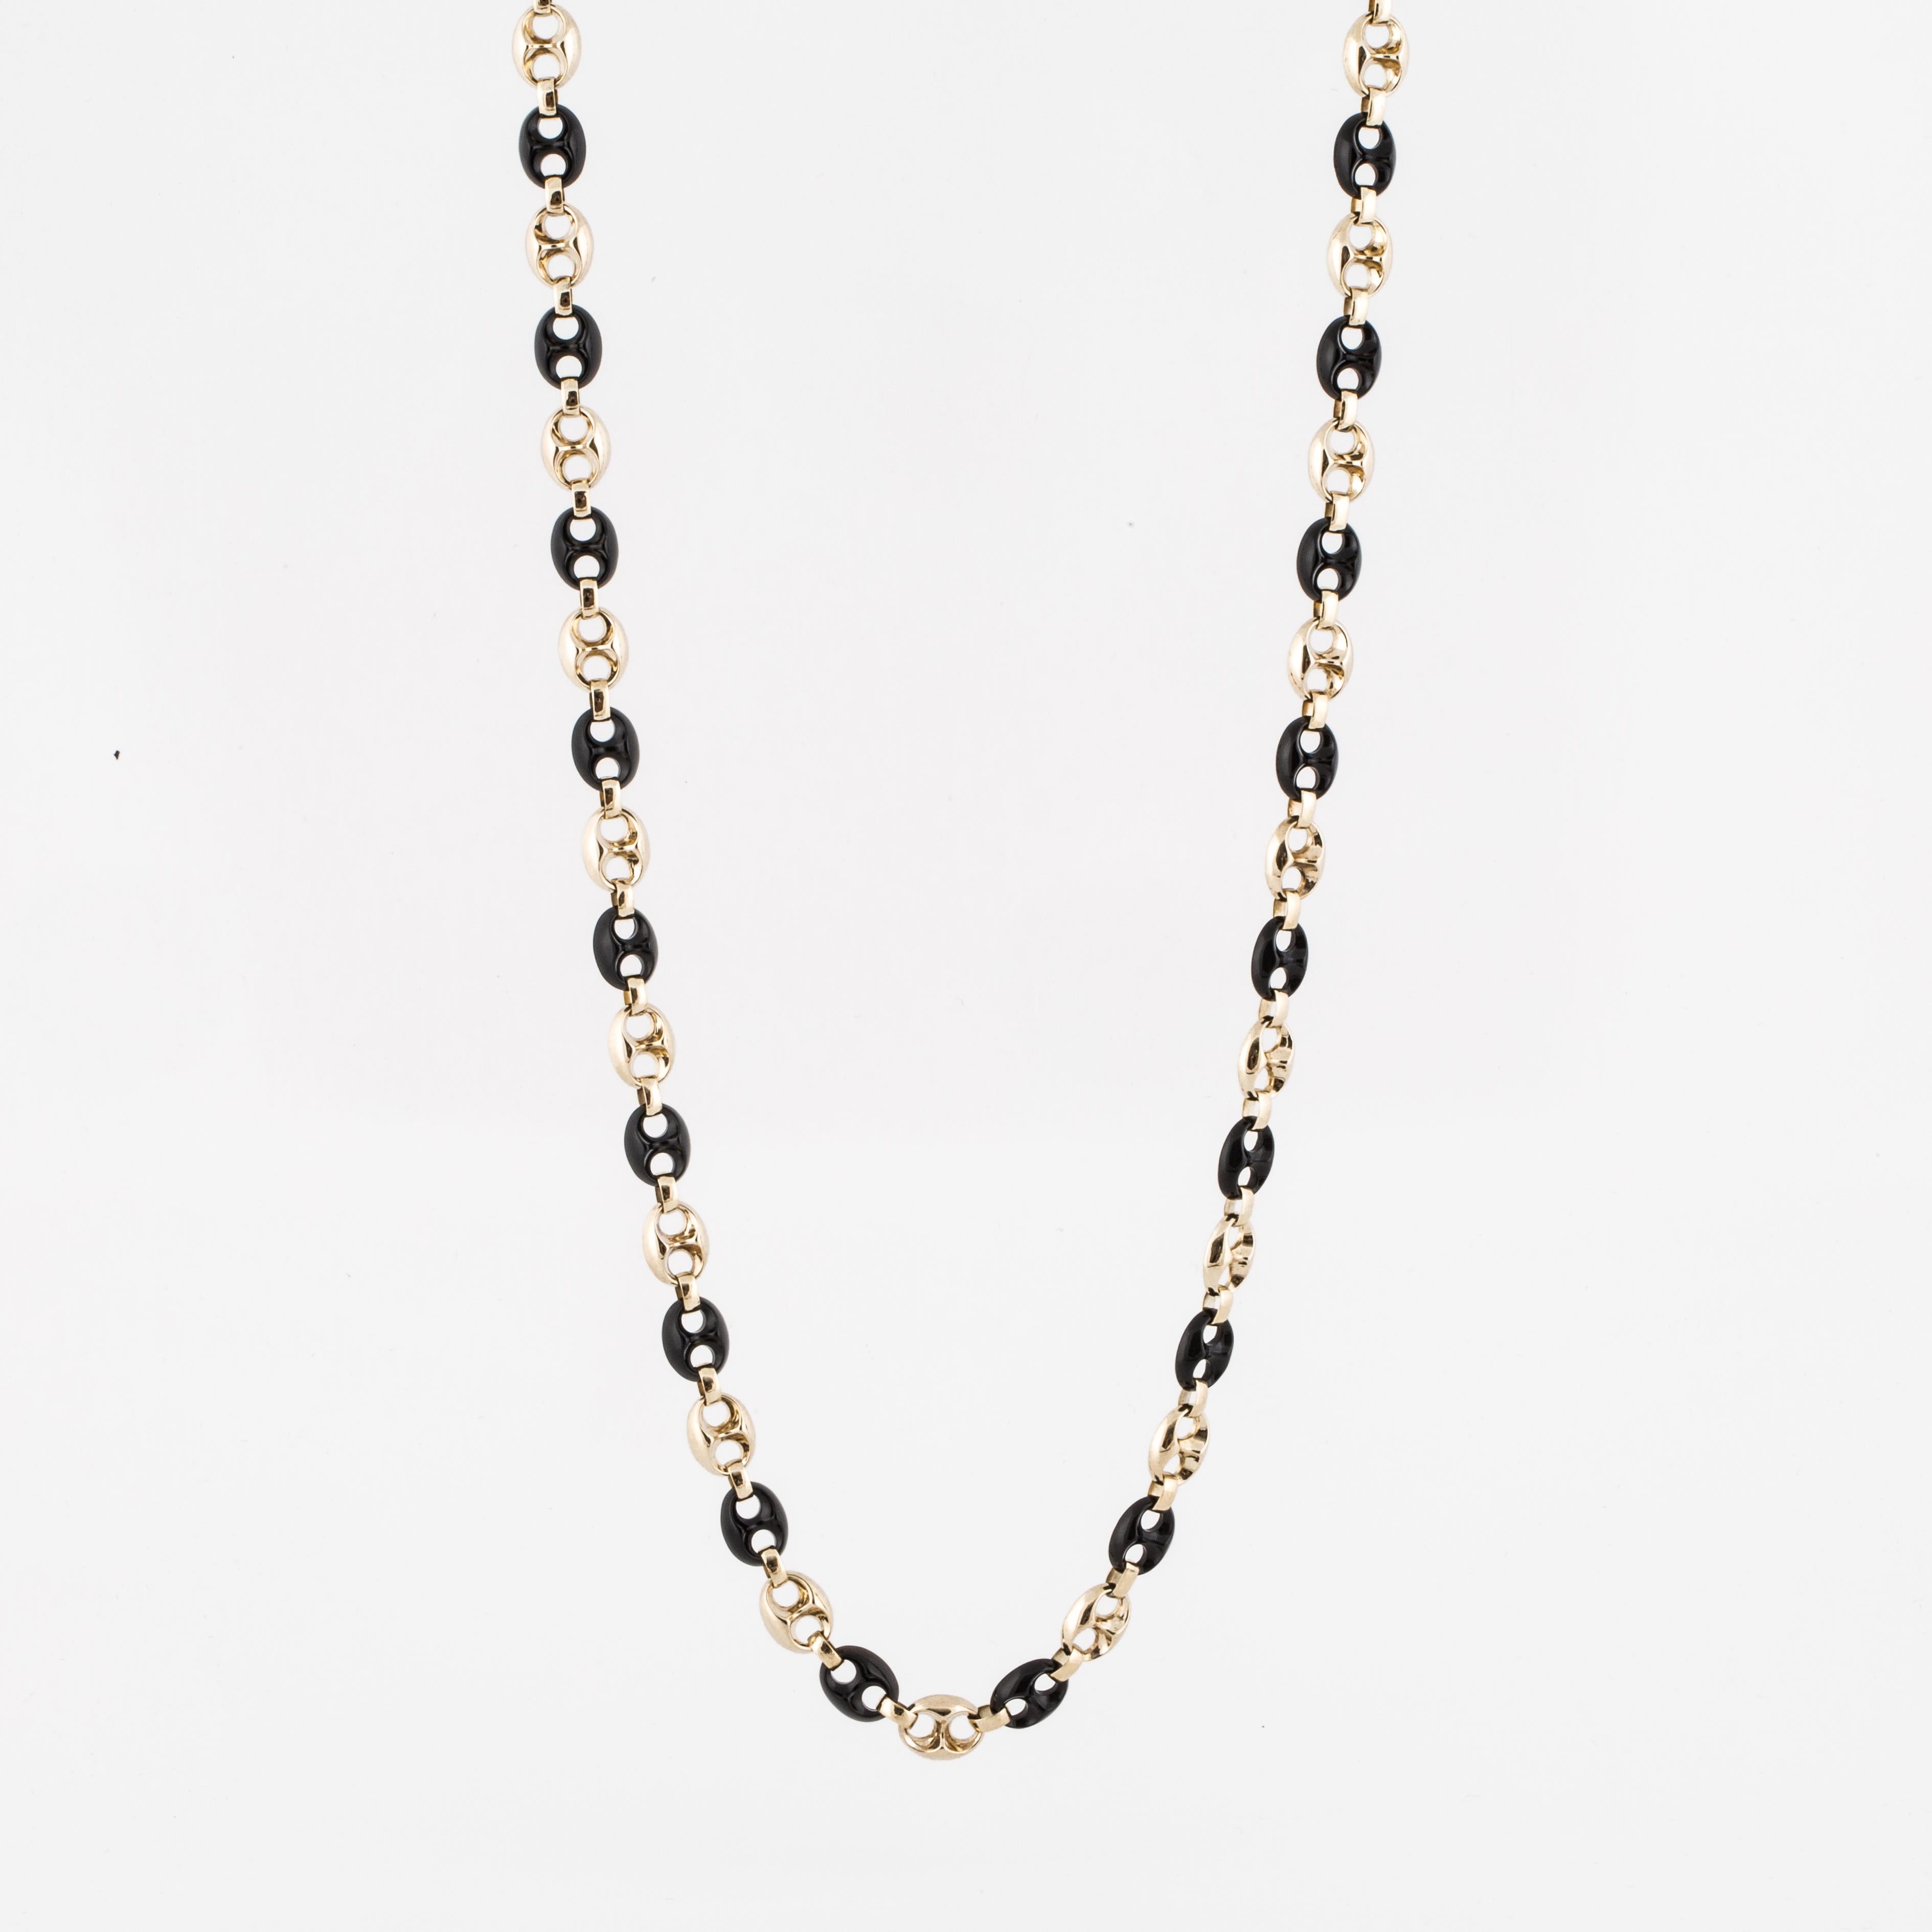 14K yellow gold and onyx necklace with alternating gold and onyx anchor links.  Tongue closure with figure eight safety.  Measures 3/8 inches wide and 30 inches long.